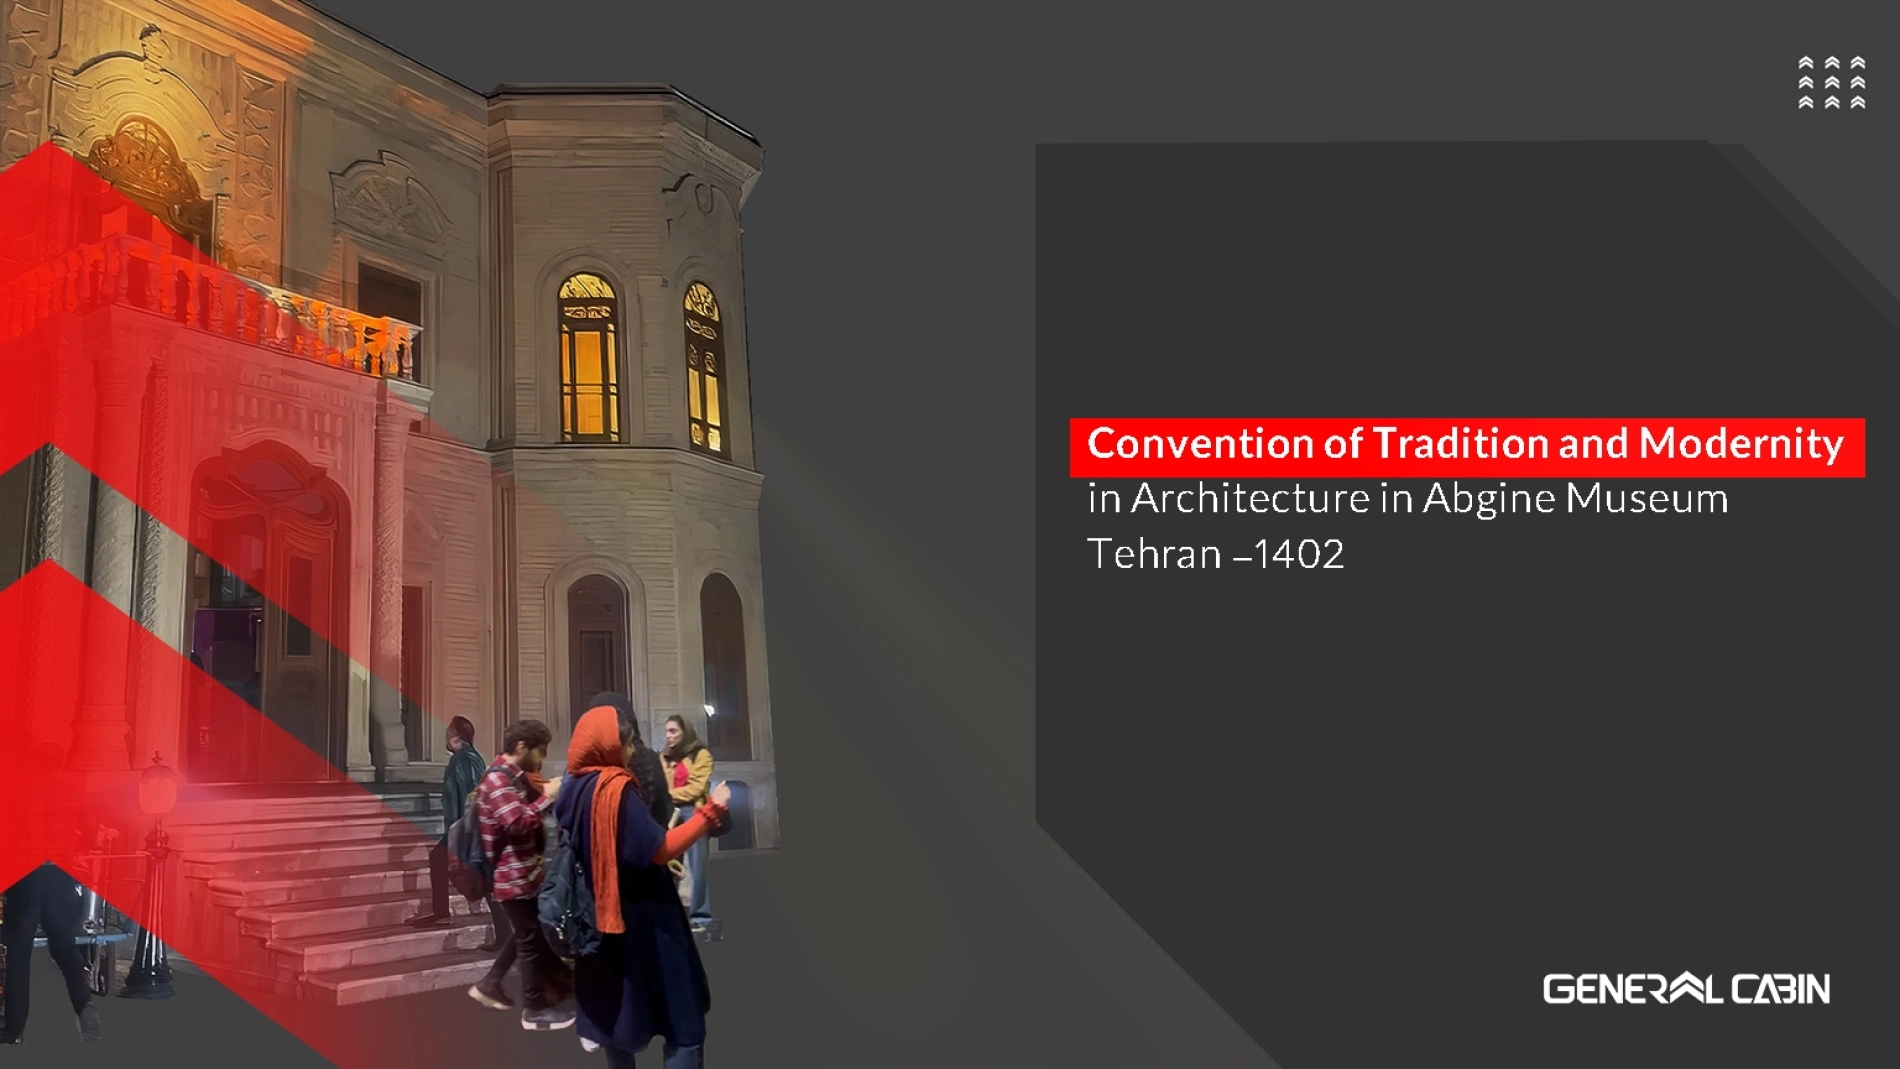 Convention Of Tradition And Modernity In Architecture In Abgine Museum, Tehran, 1402